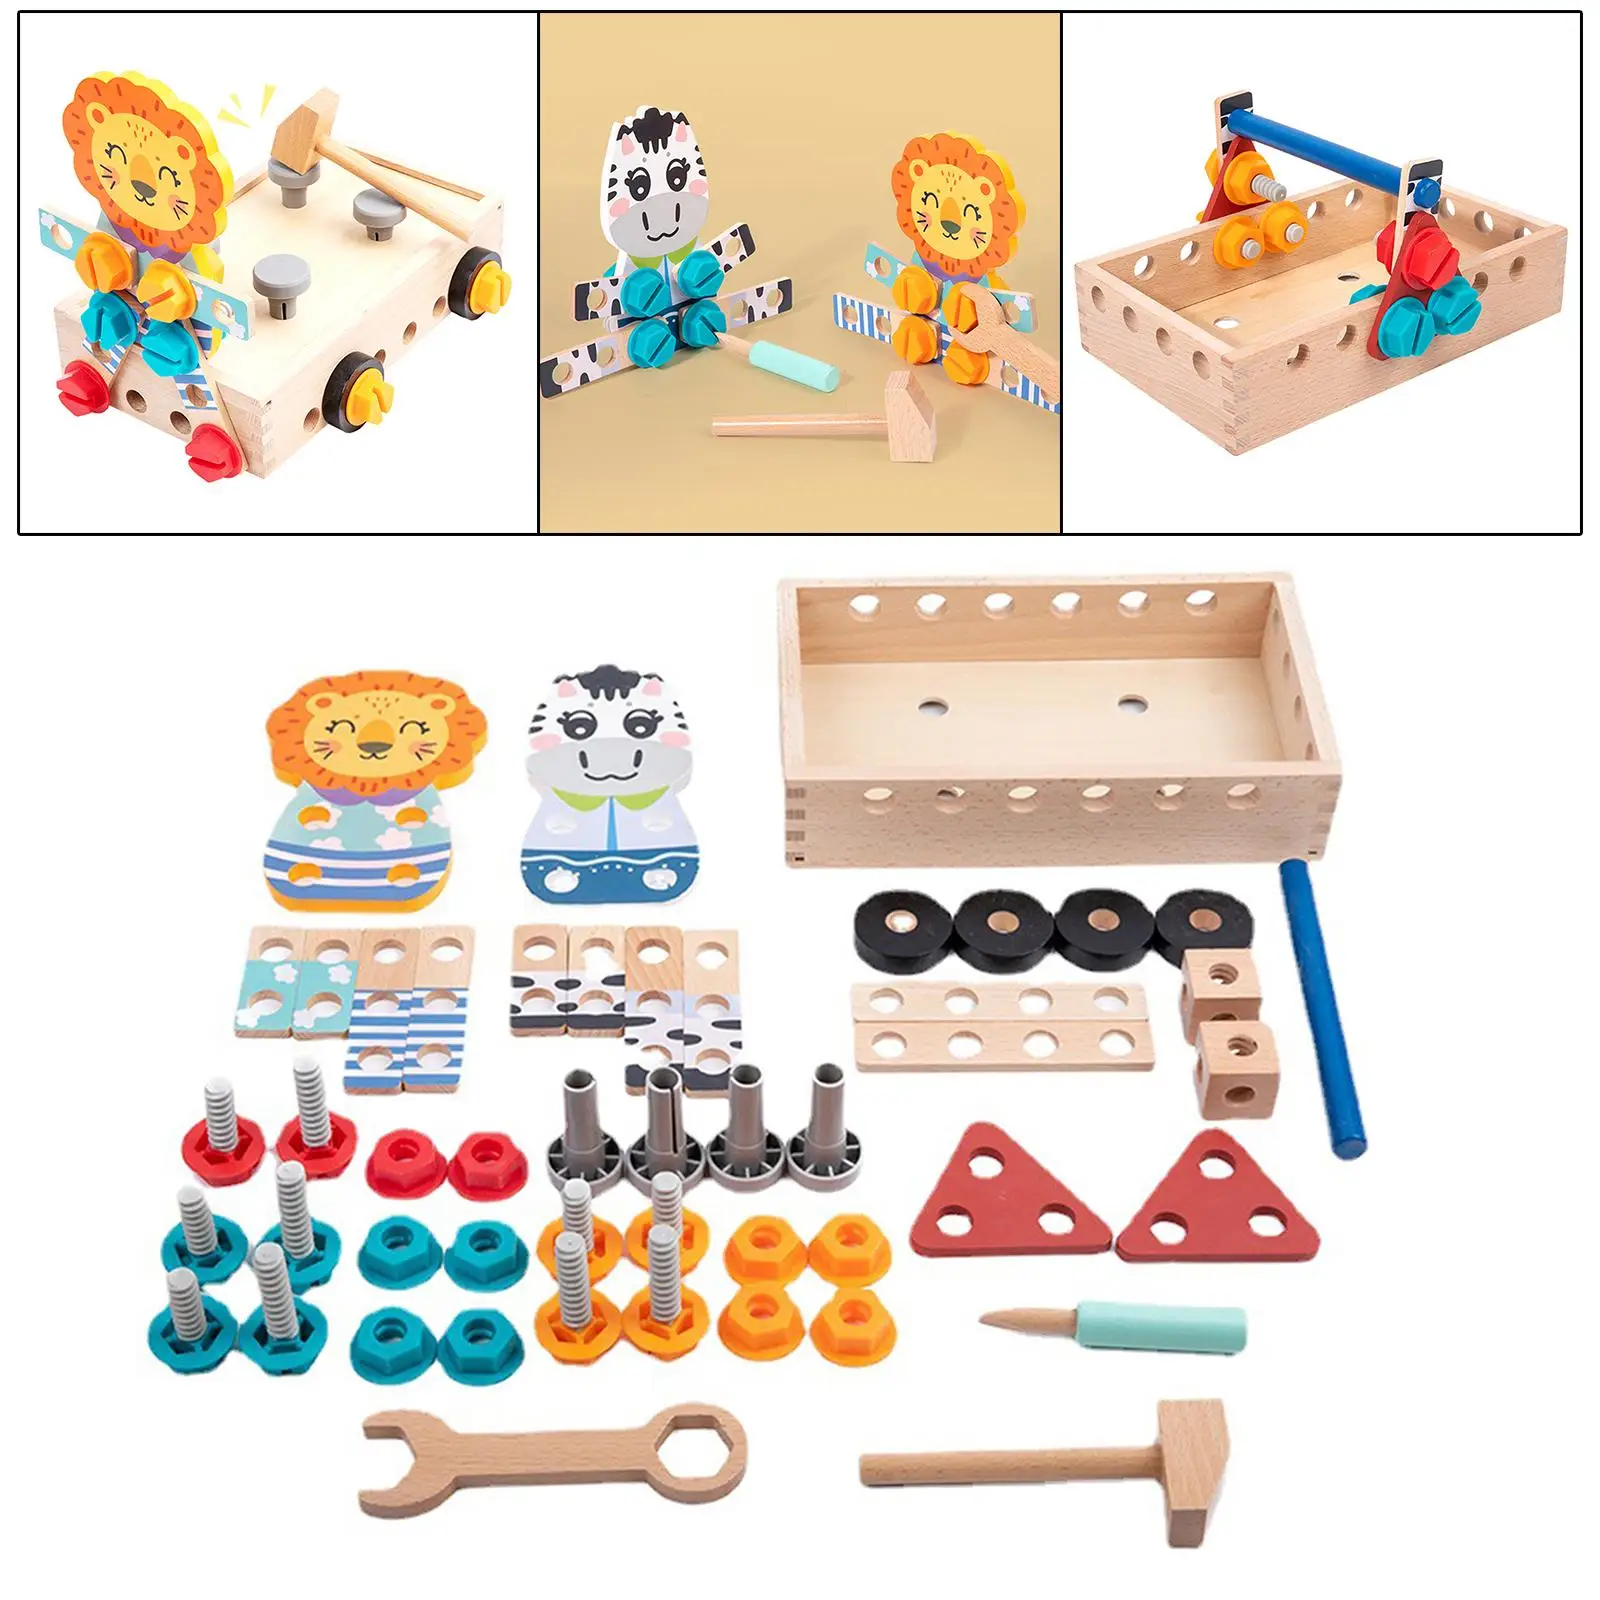 Pretend Game Toolbox Kids Construction Toy Set for Role Play Outdoor Indoor